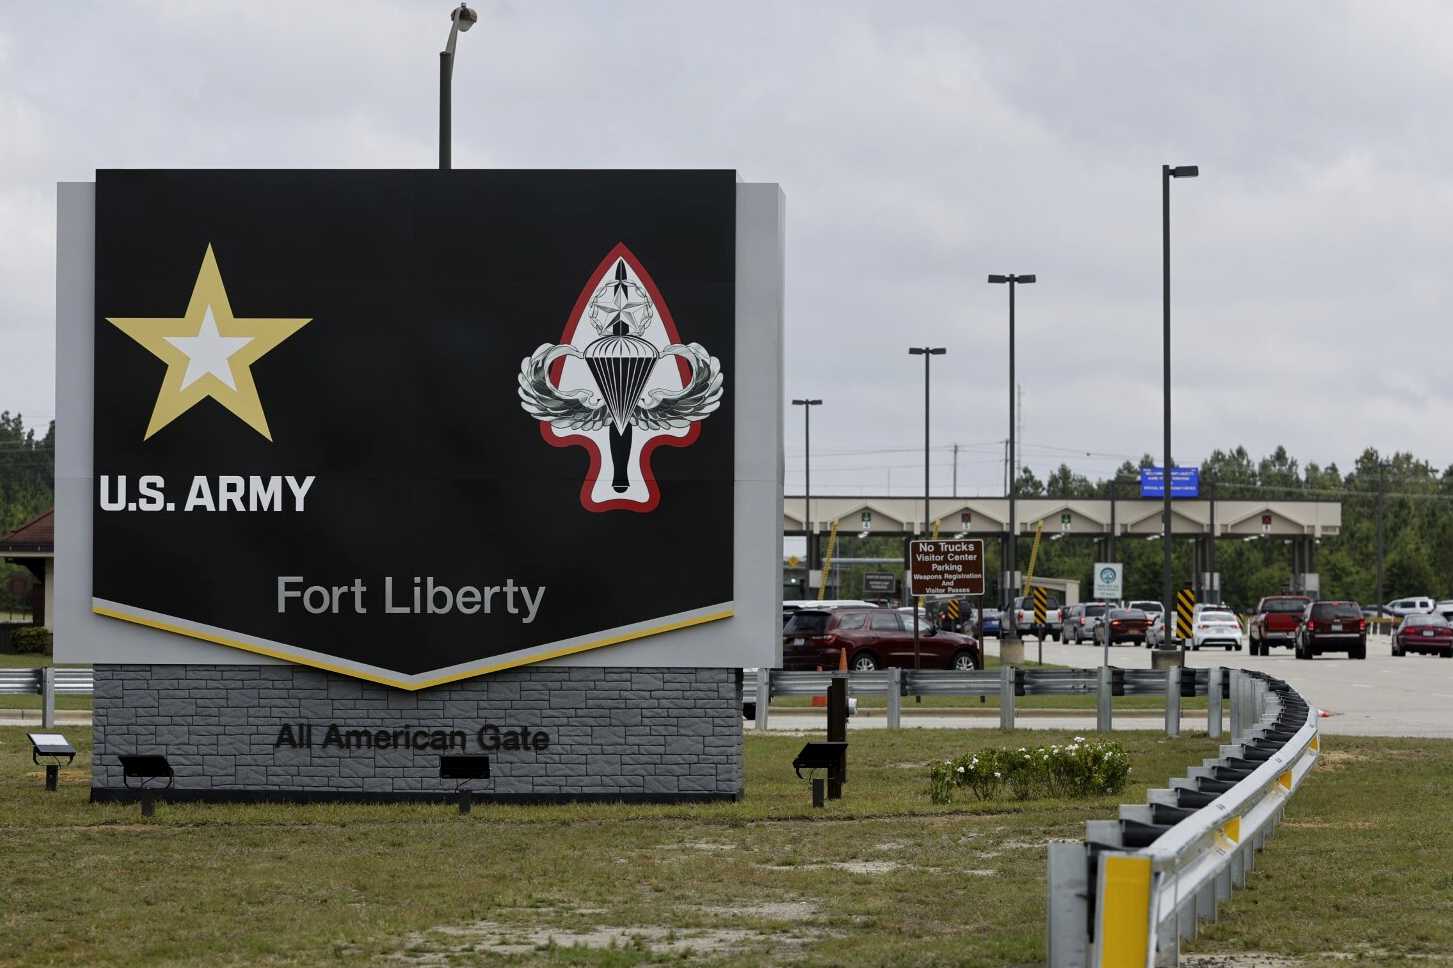 Fort Bragg becomes Fort Liberty in Army's most prominent move to erase Confederate names from bases